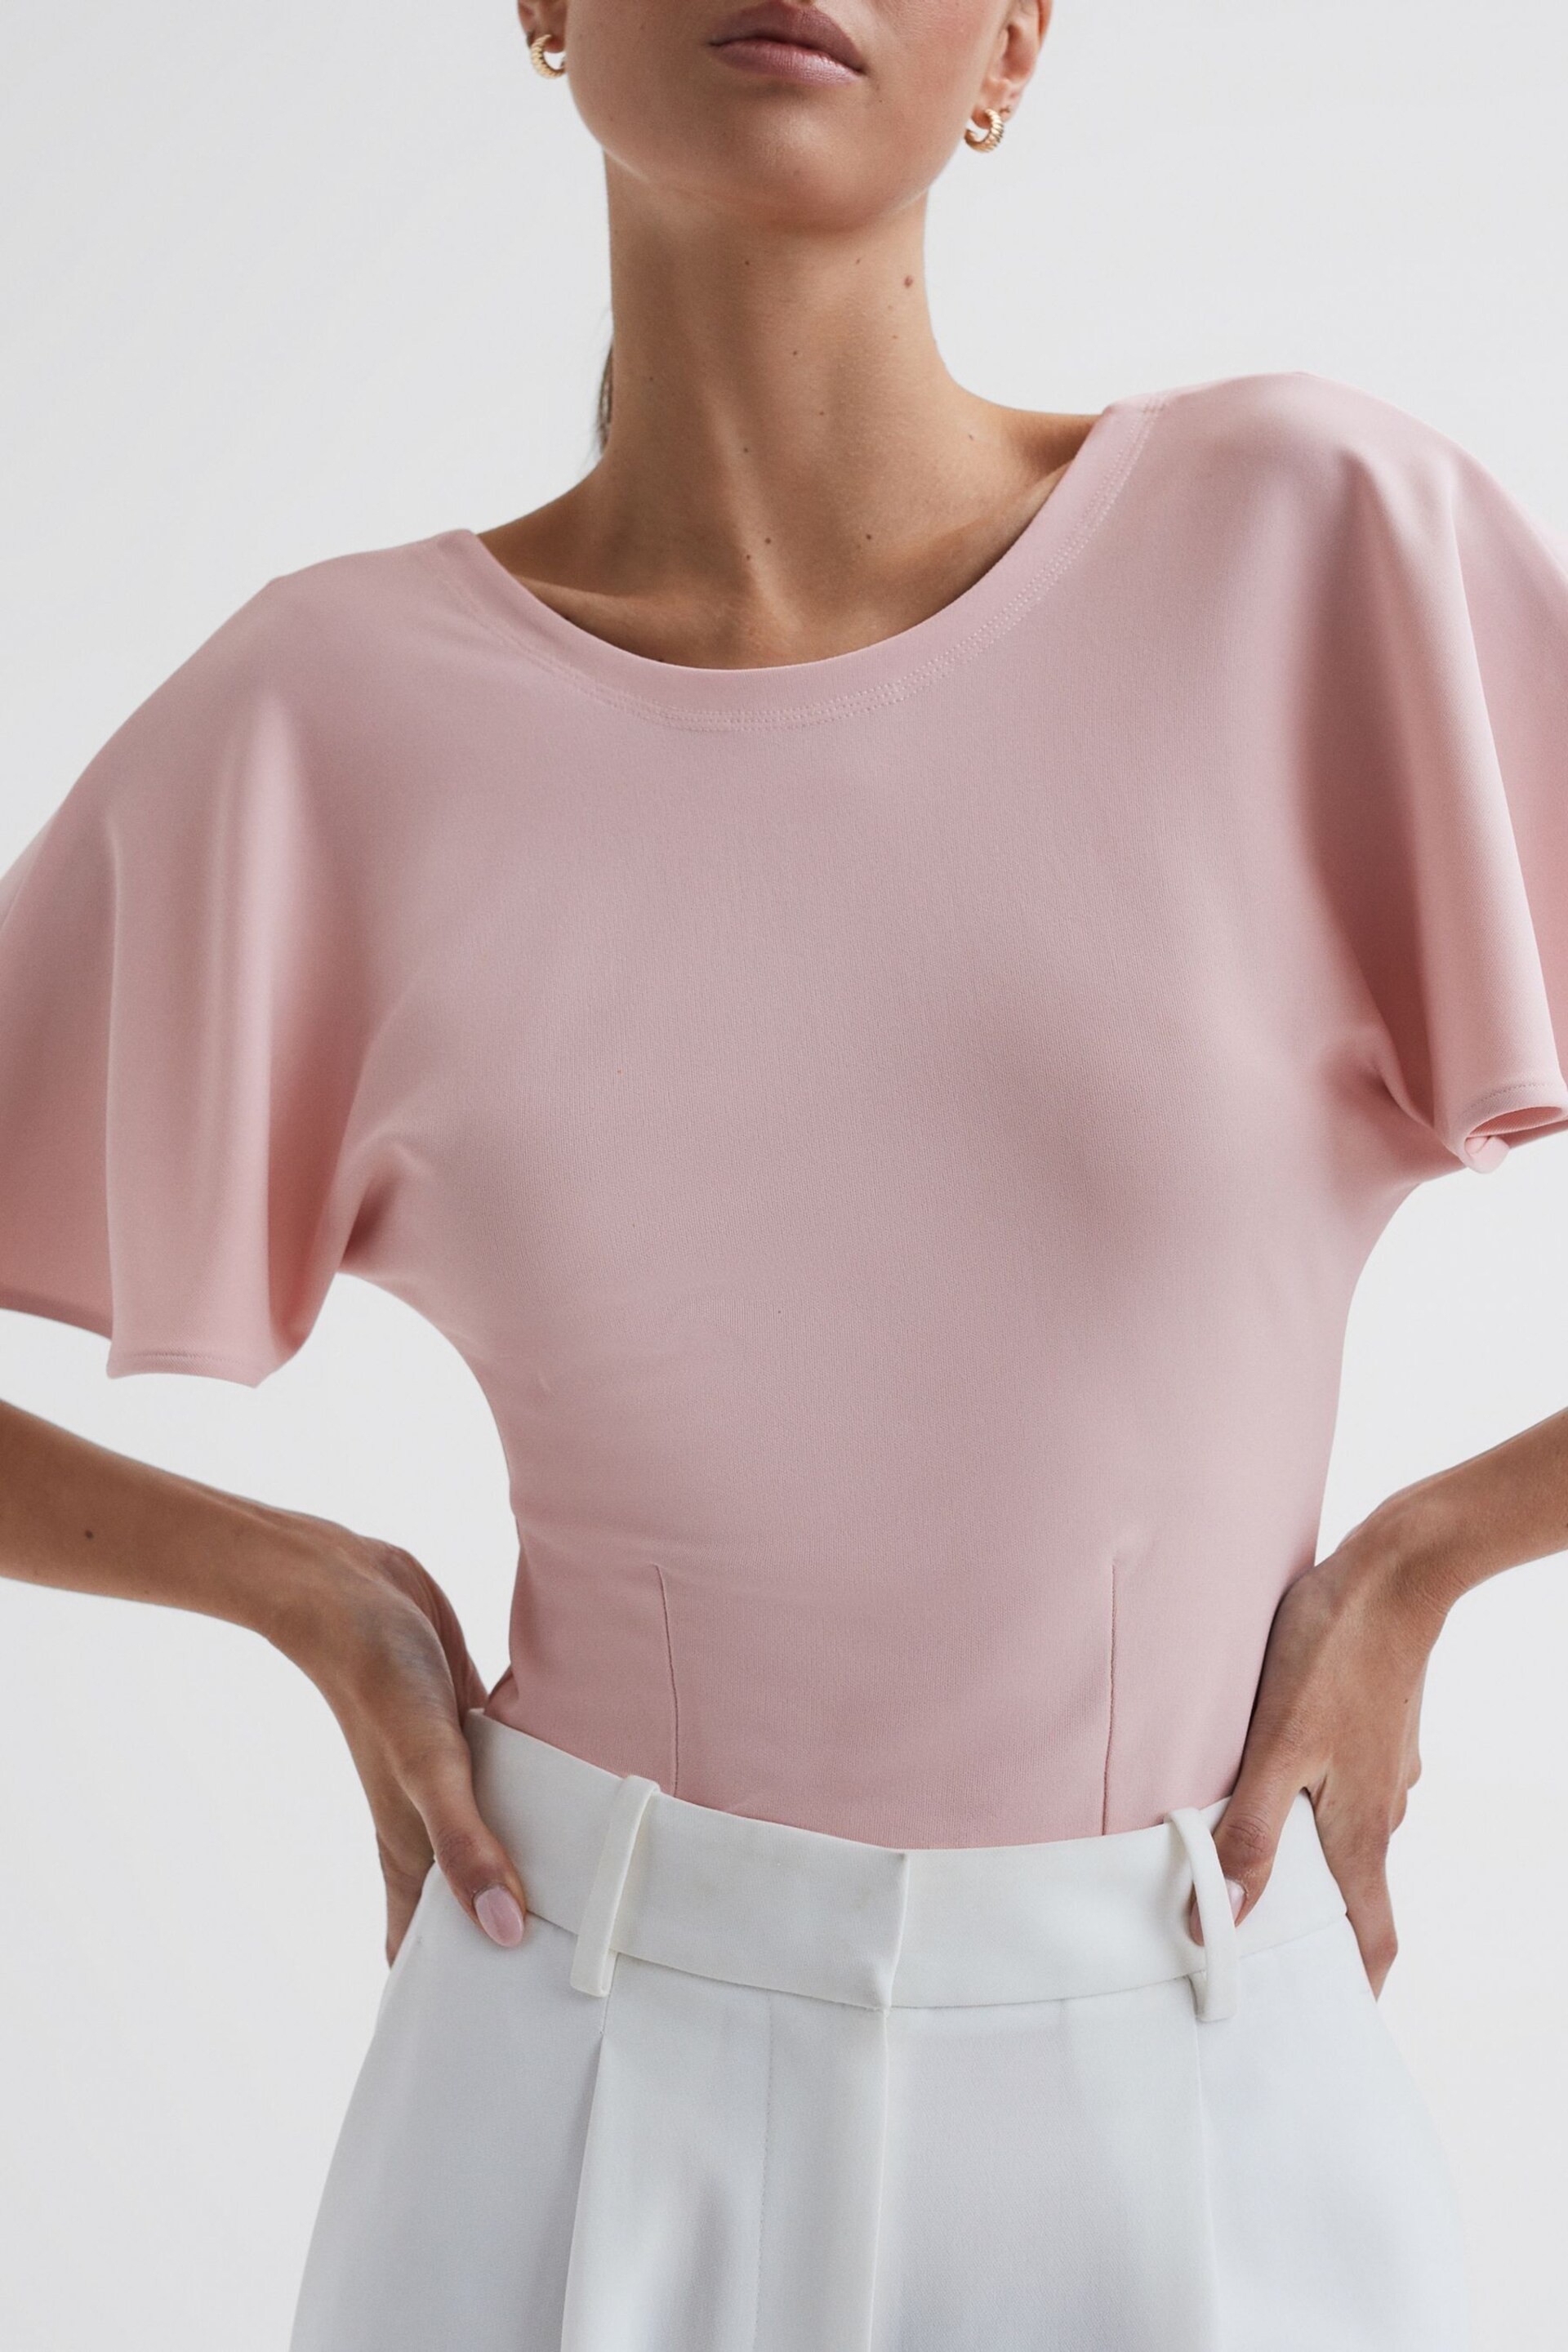 Reiss Light Pink Connie Fluid Sleeve T-Shirt - Image 1 of 4